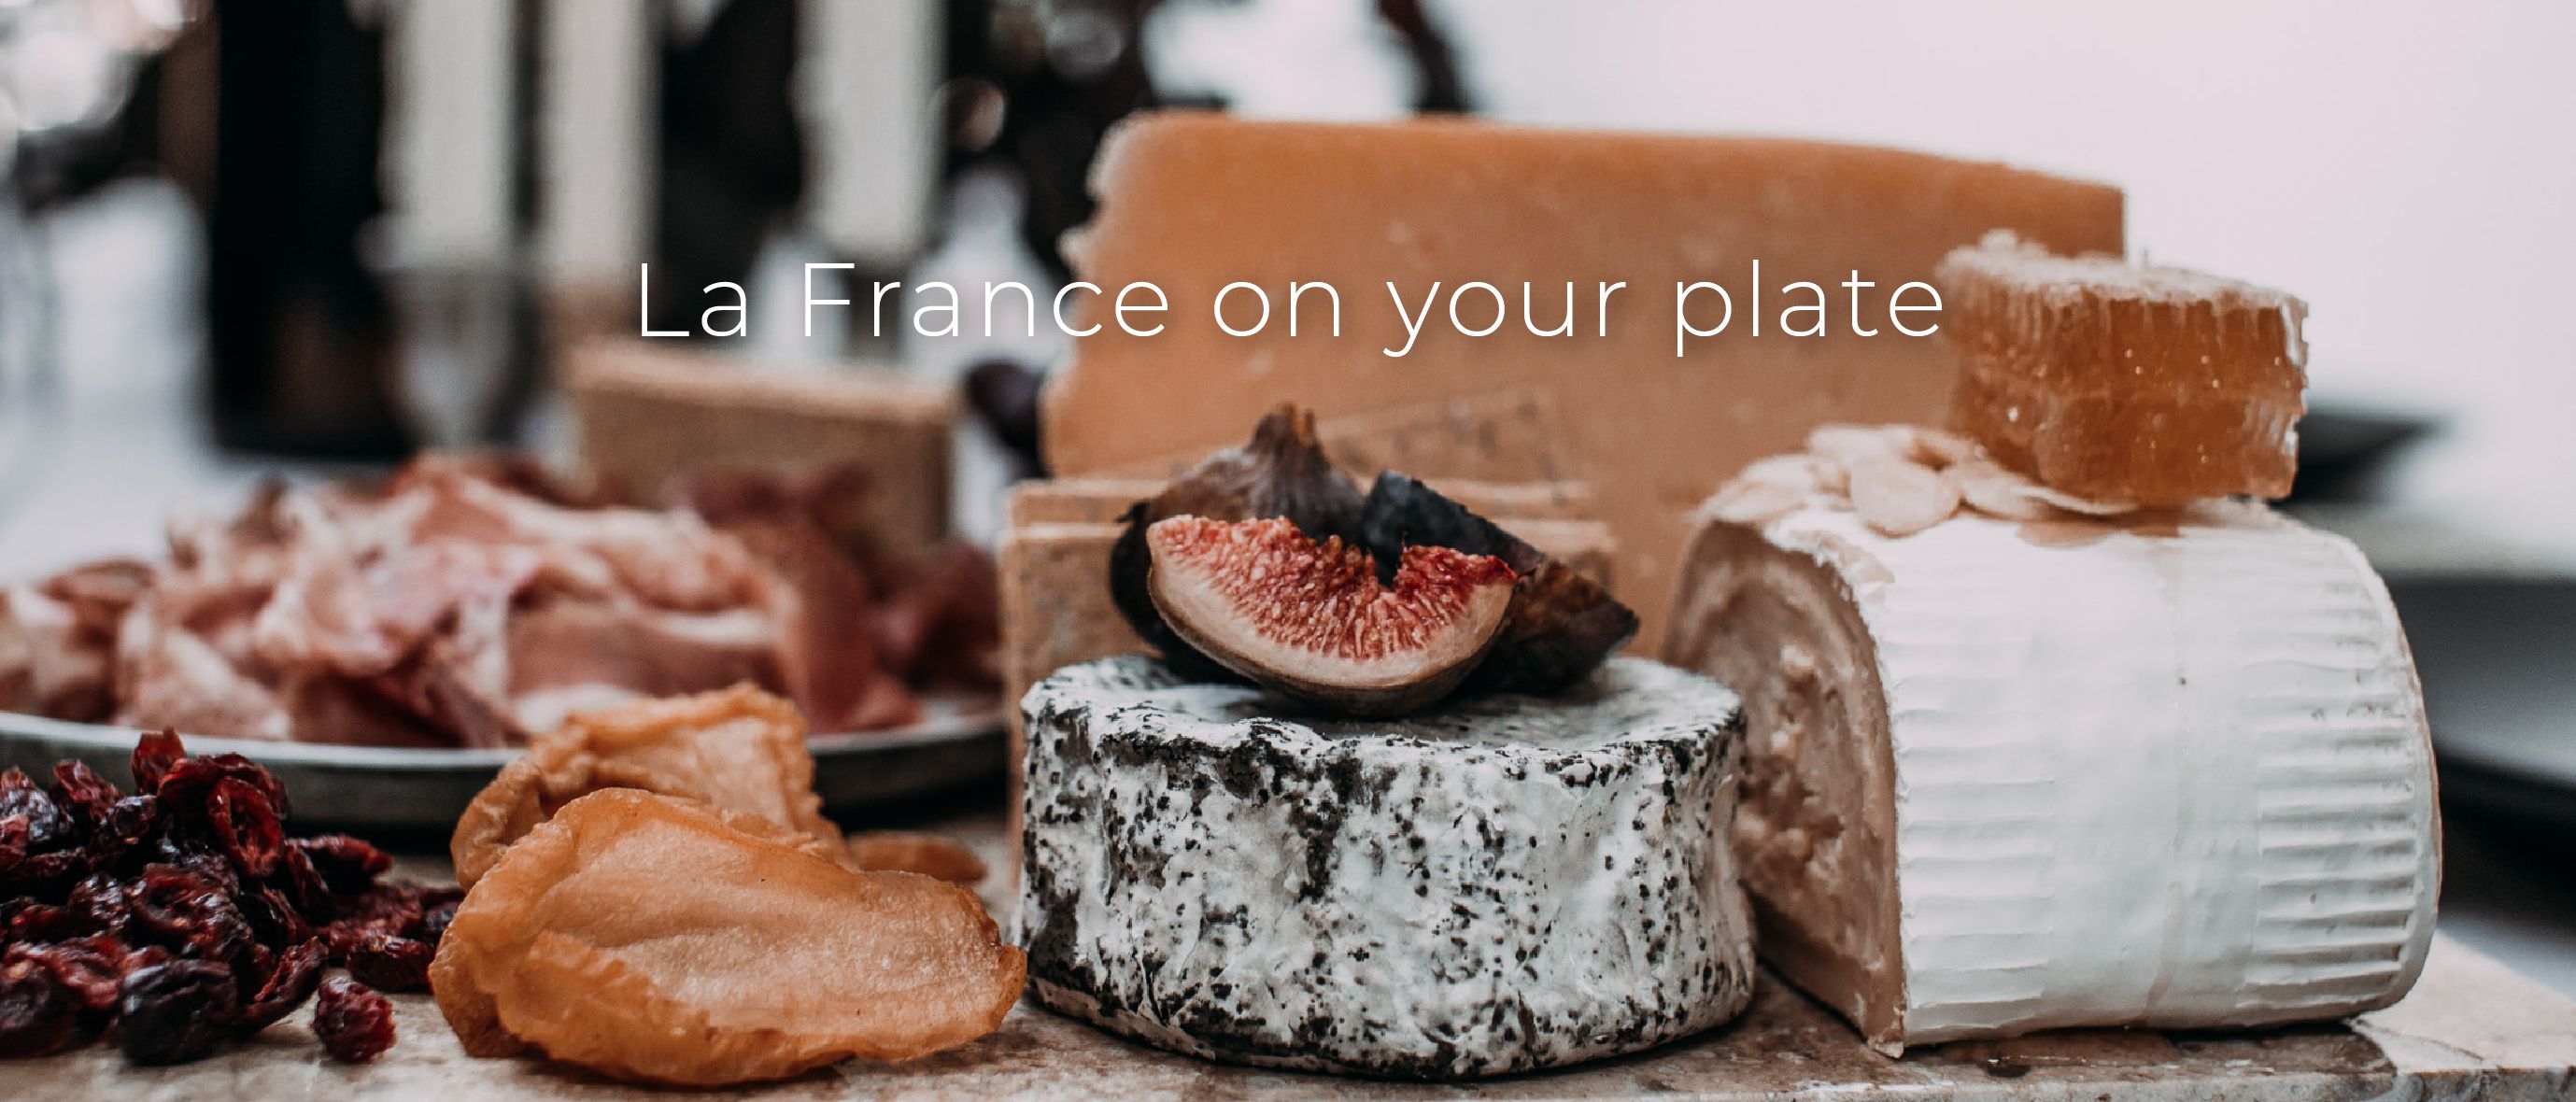 La France on your plate